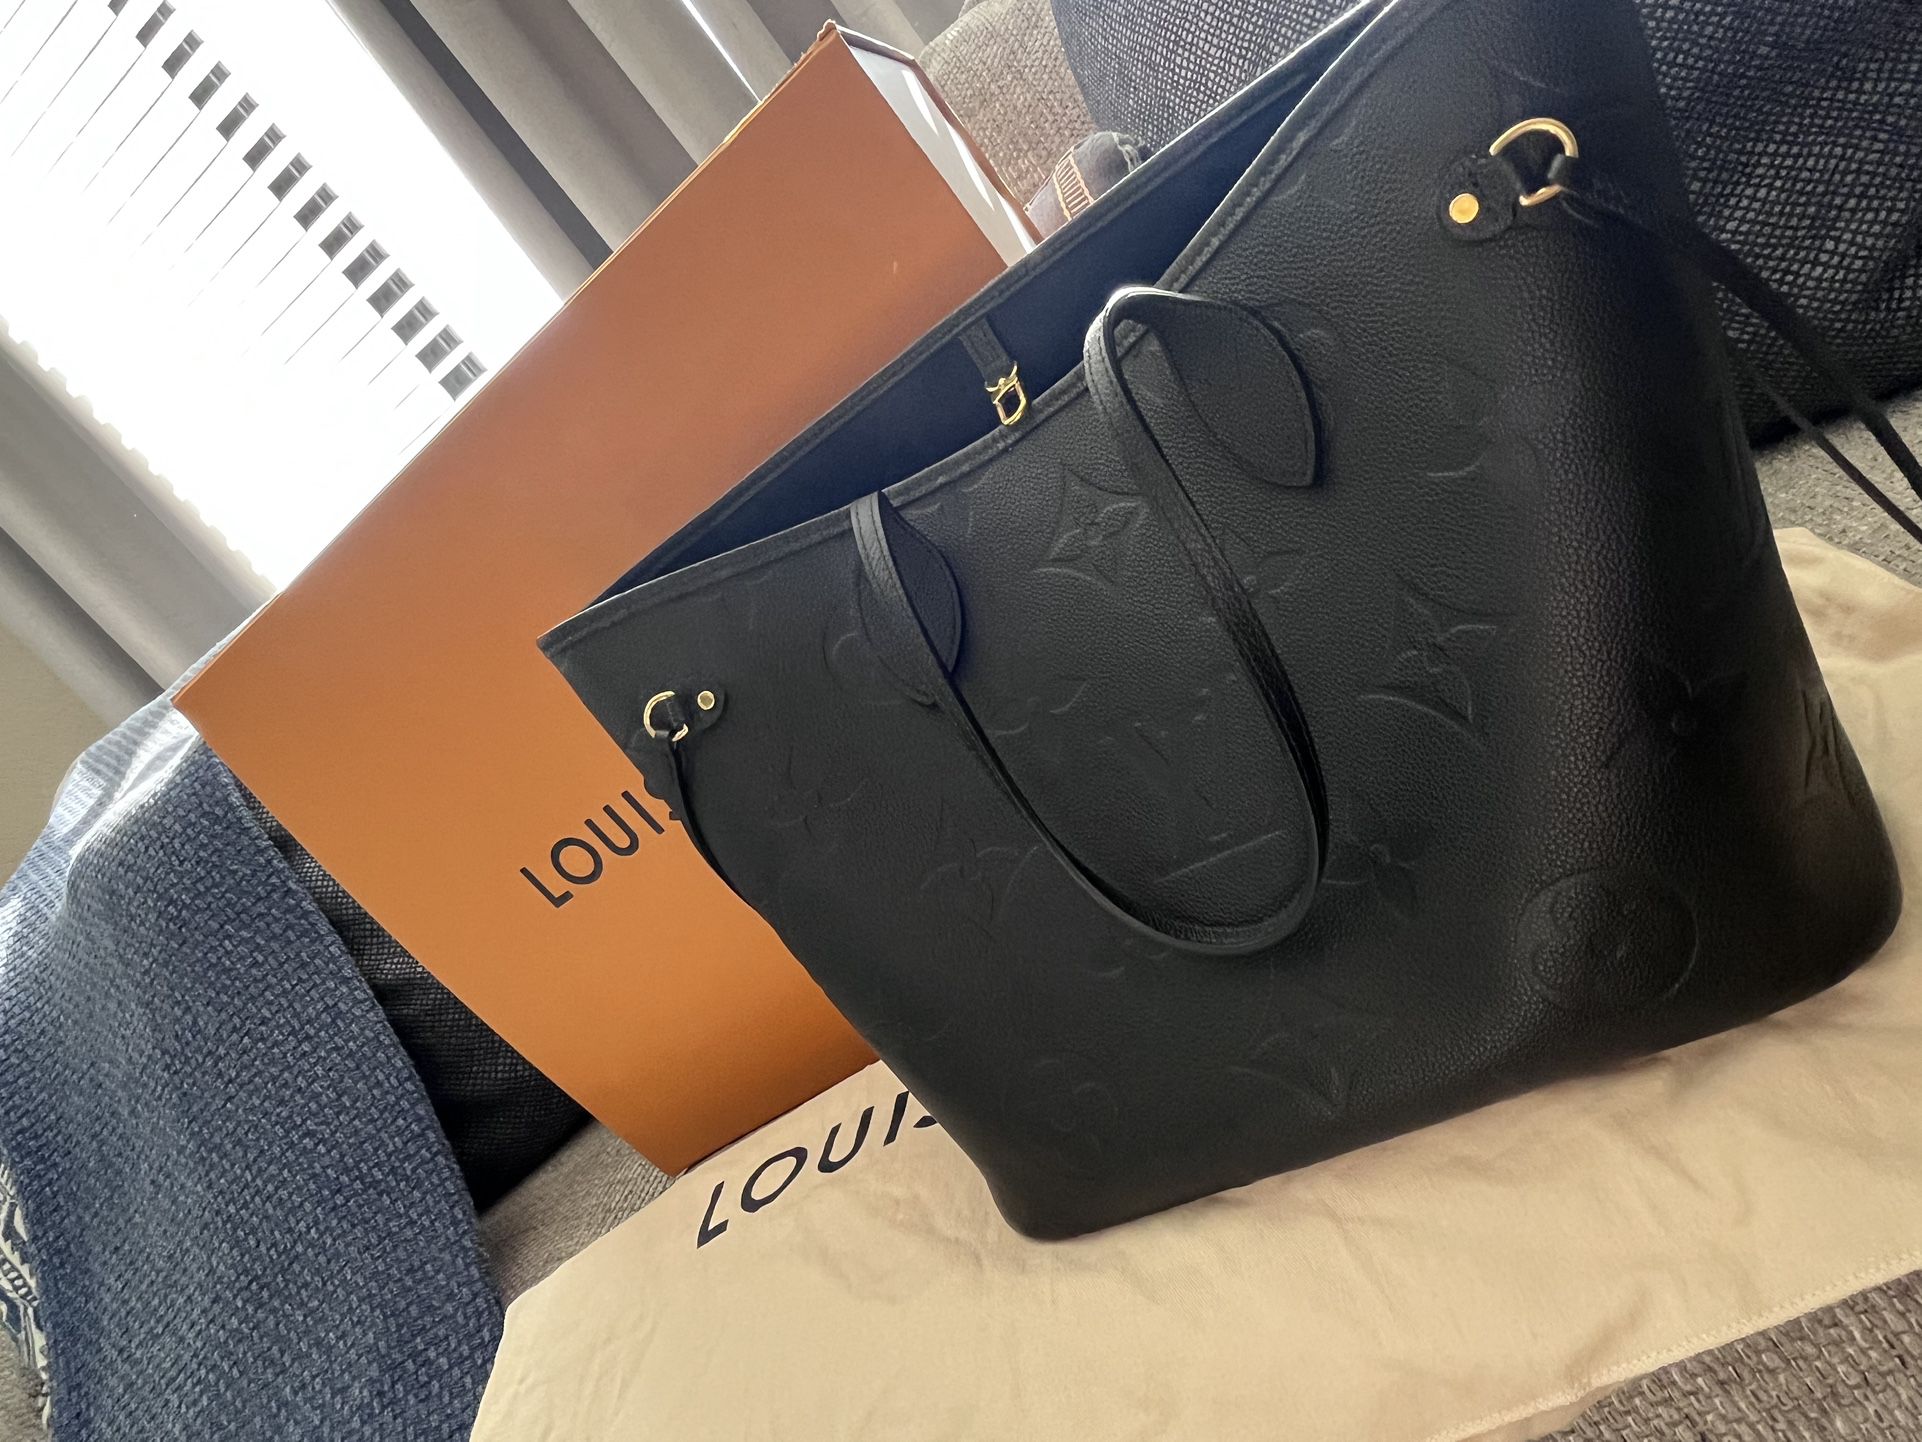 Selling my LV bag used but in new condition